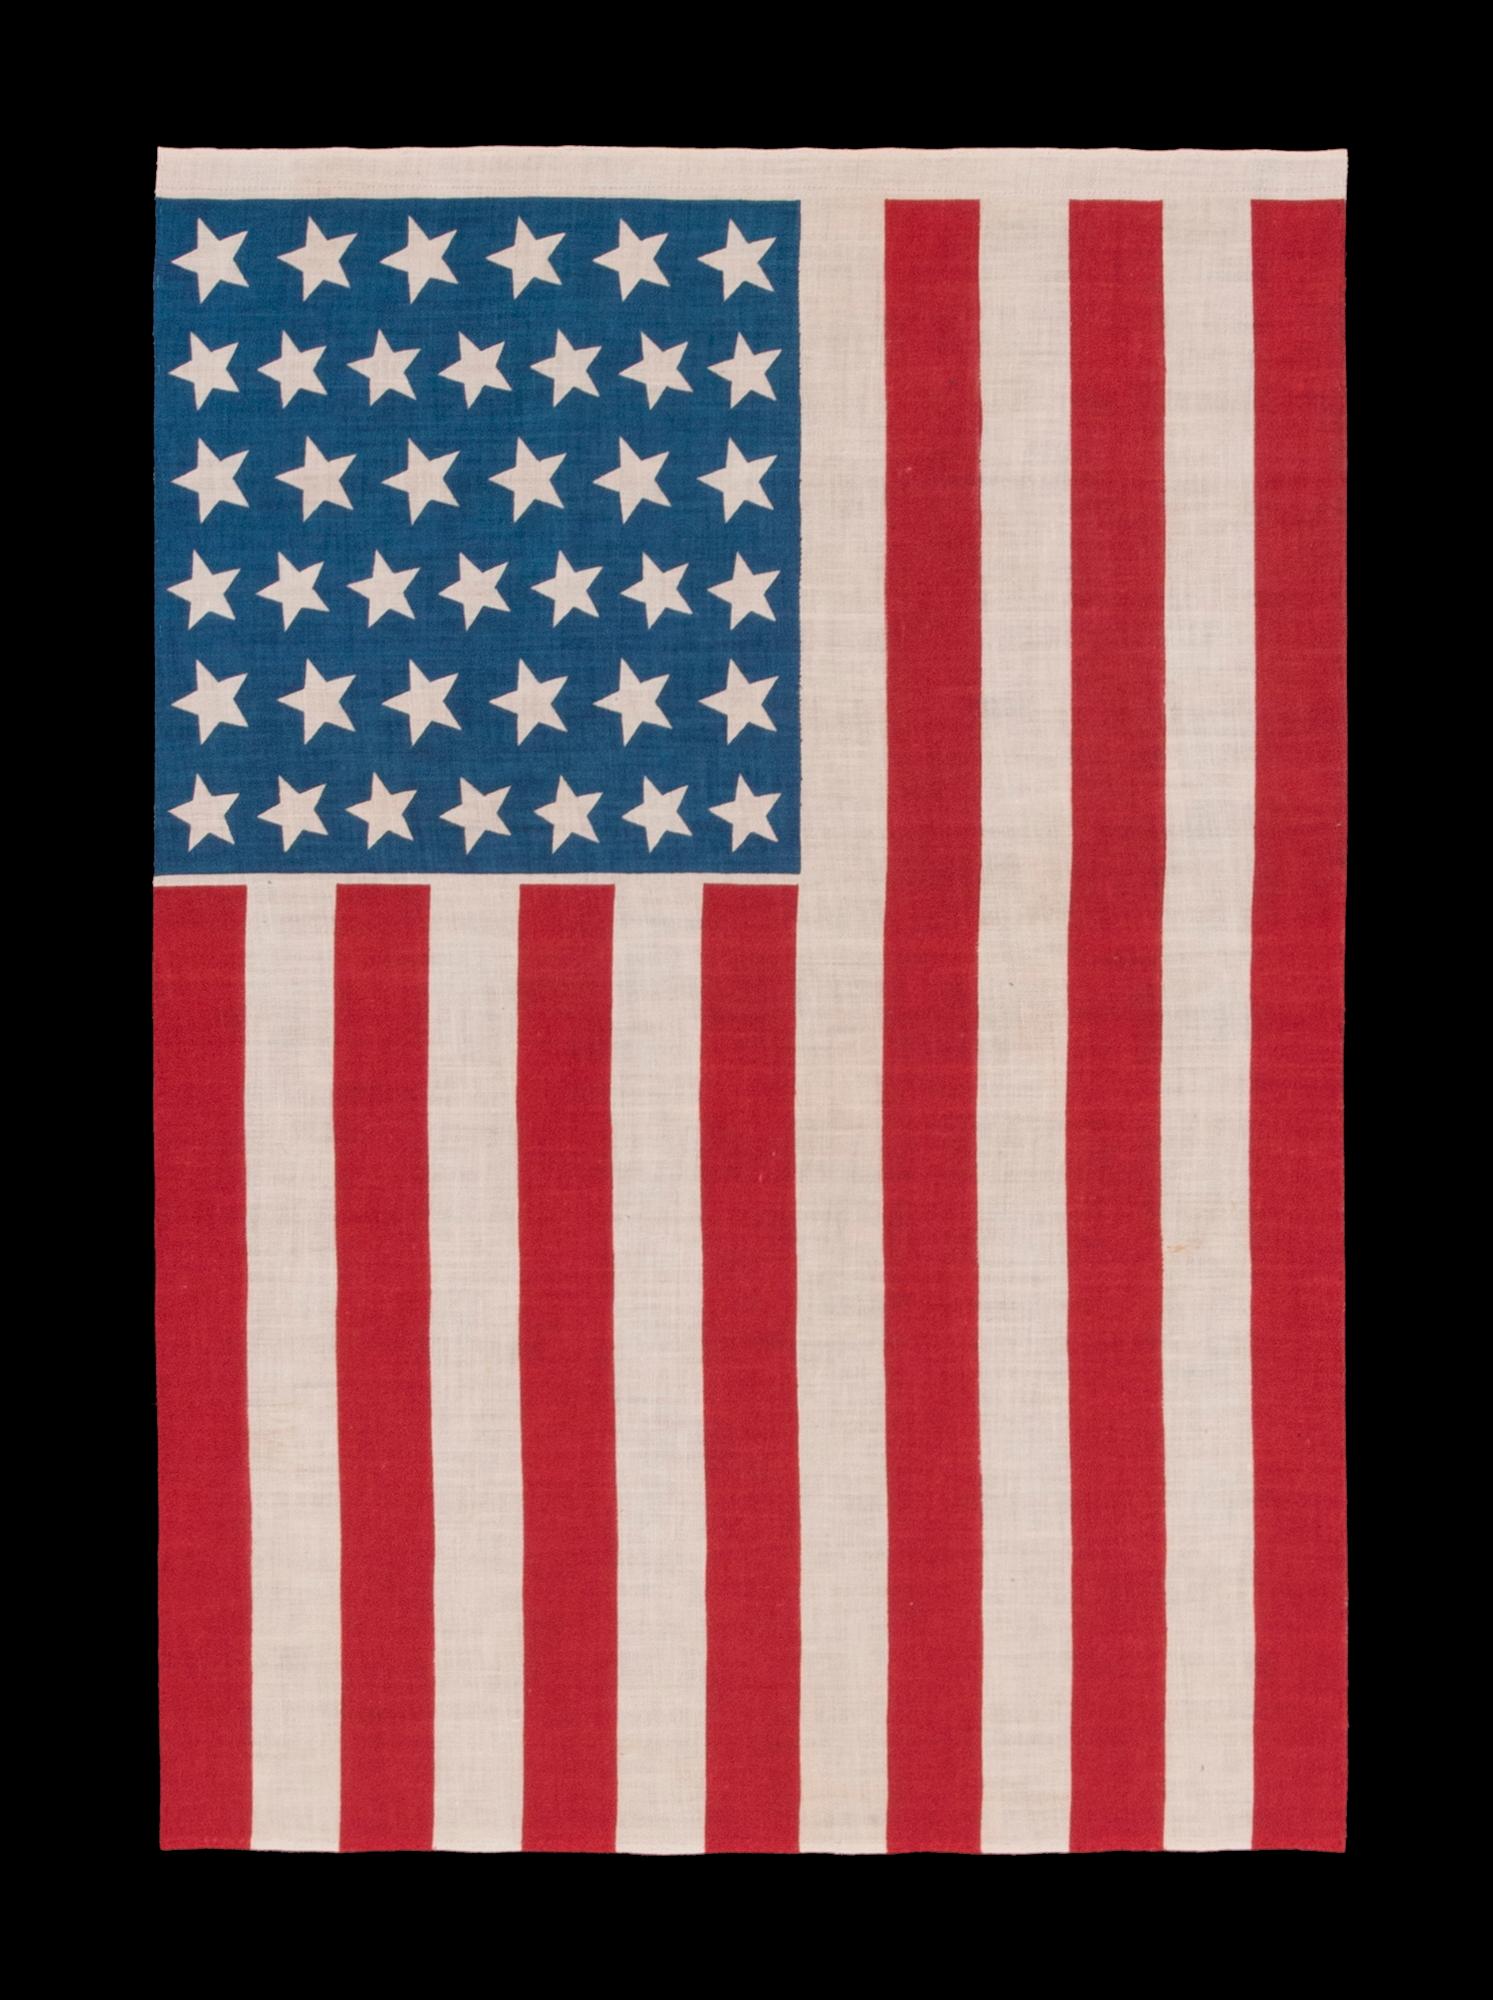 39 STARS IN TWO SIZES, ALTERNATING FROM ONE COLUMN TO THE NEXT, ON AN ANTIQUE AMERICAN PARADE FLAG DATING TO THE 1876 CENTENNIAL, NEVER AN OFFICIAL STAR COUNT, REFLECTS THE ANTICIPATED ARRIVAL OF COLORADO AND THE DAKOTA TERRITORY

39 star American